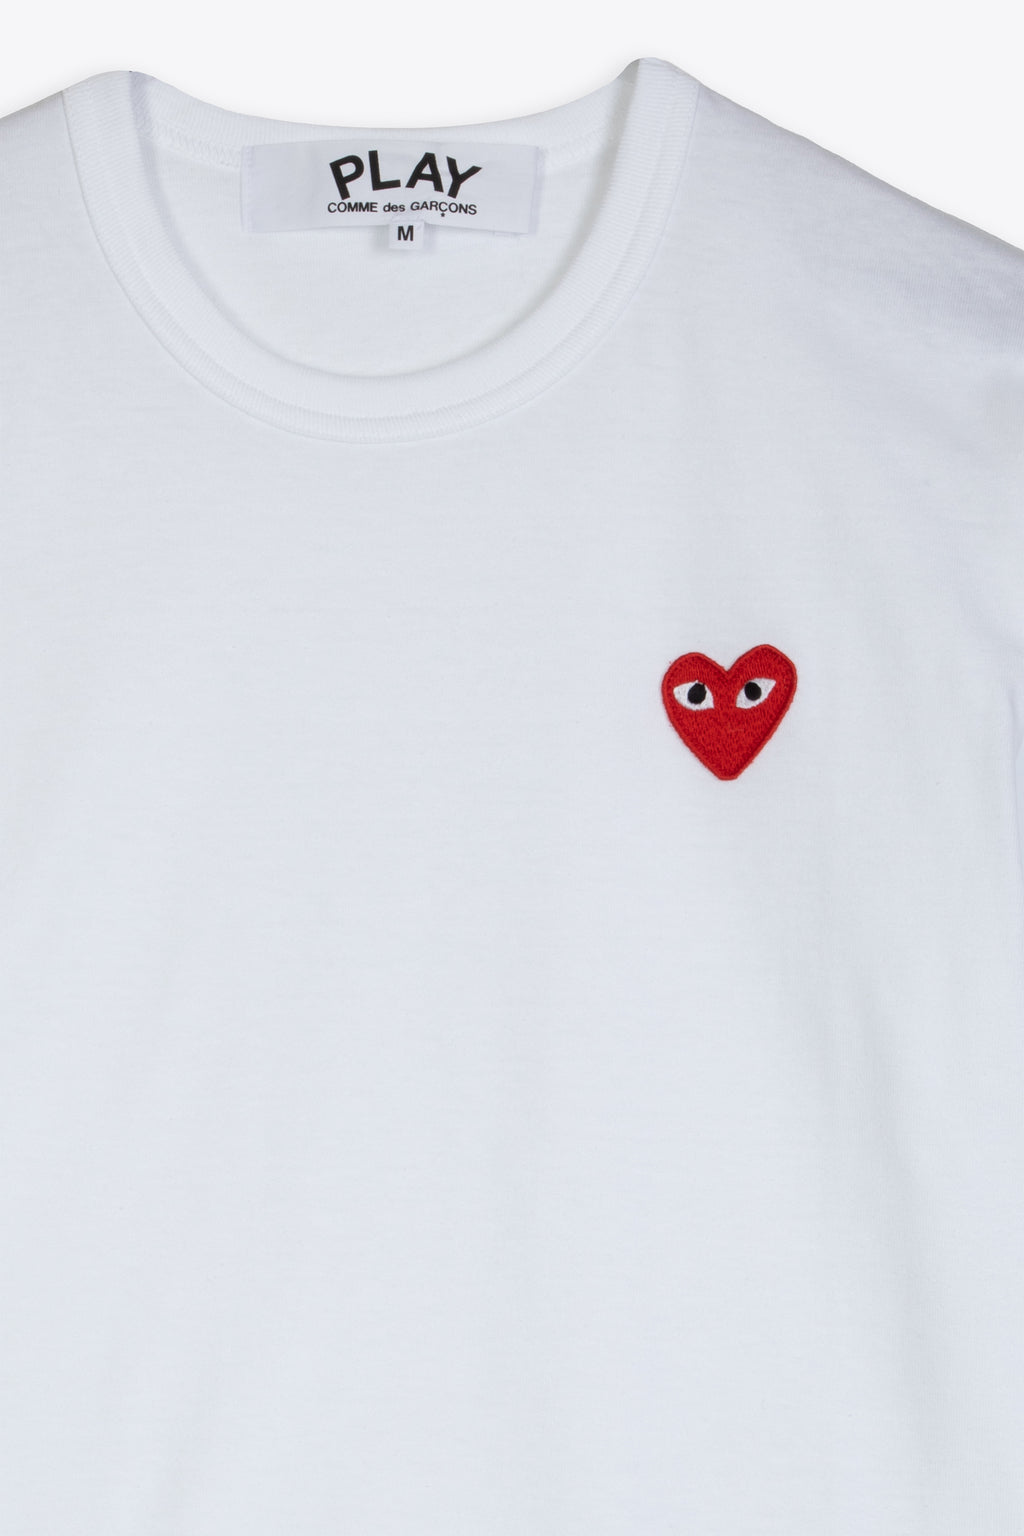 alt-image__White-t-shirt-with-big-heart-patch